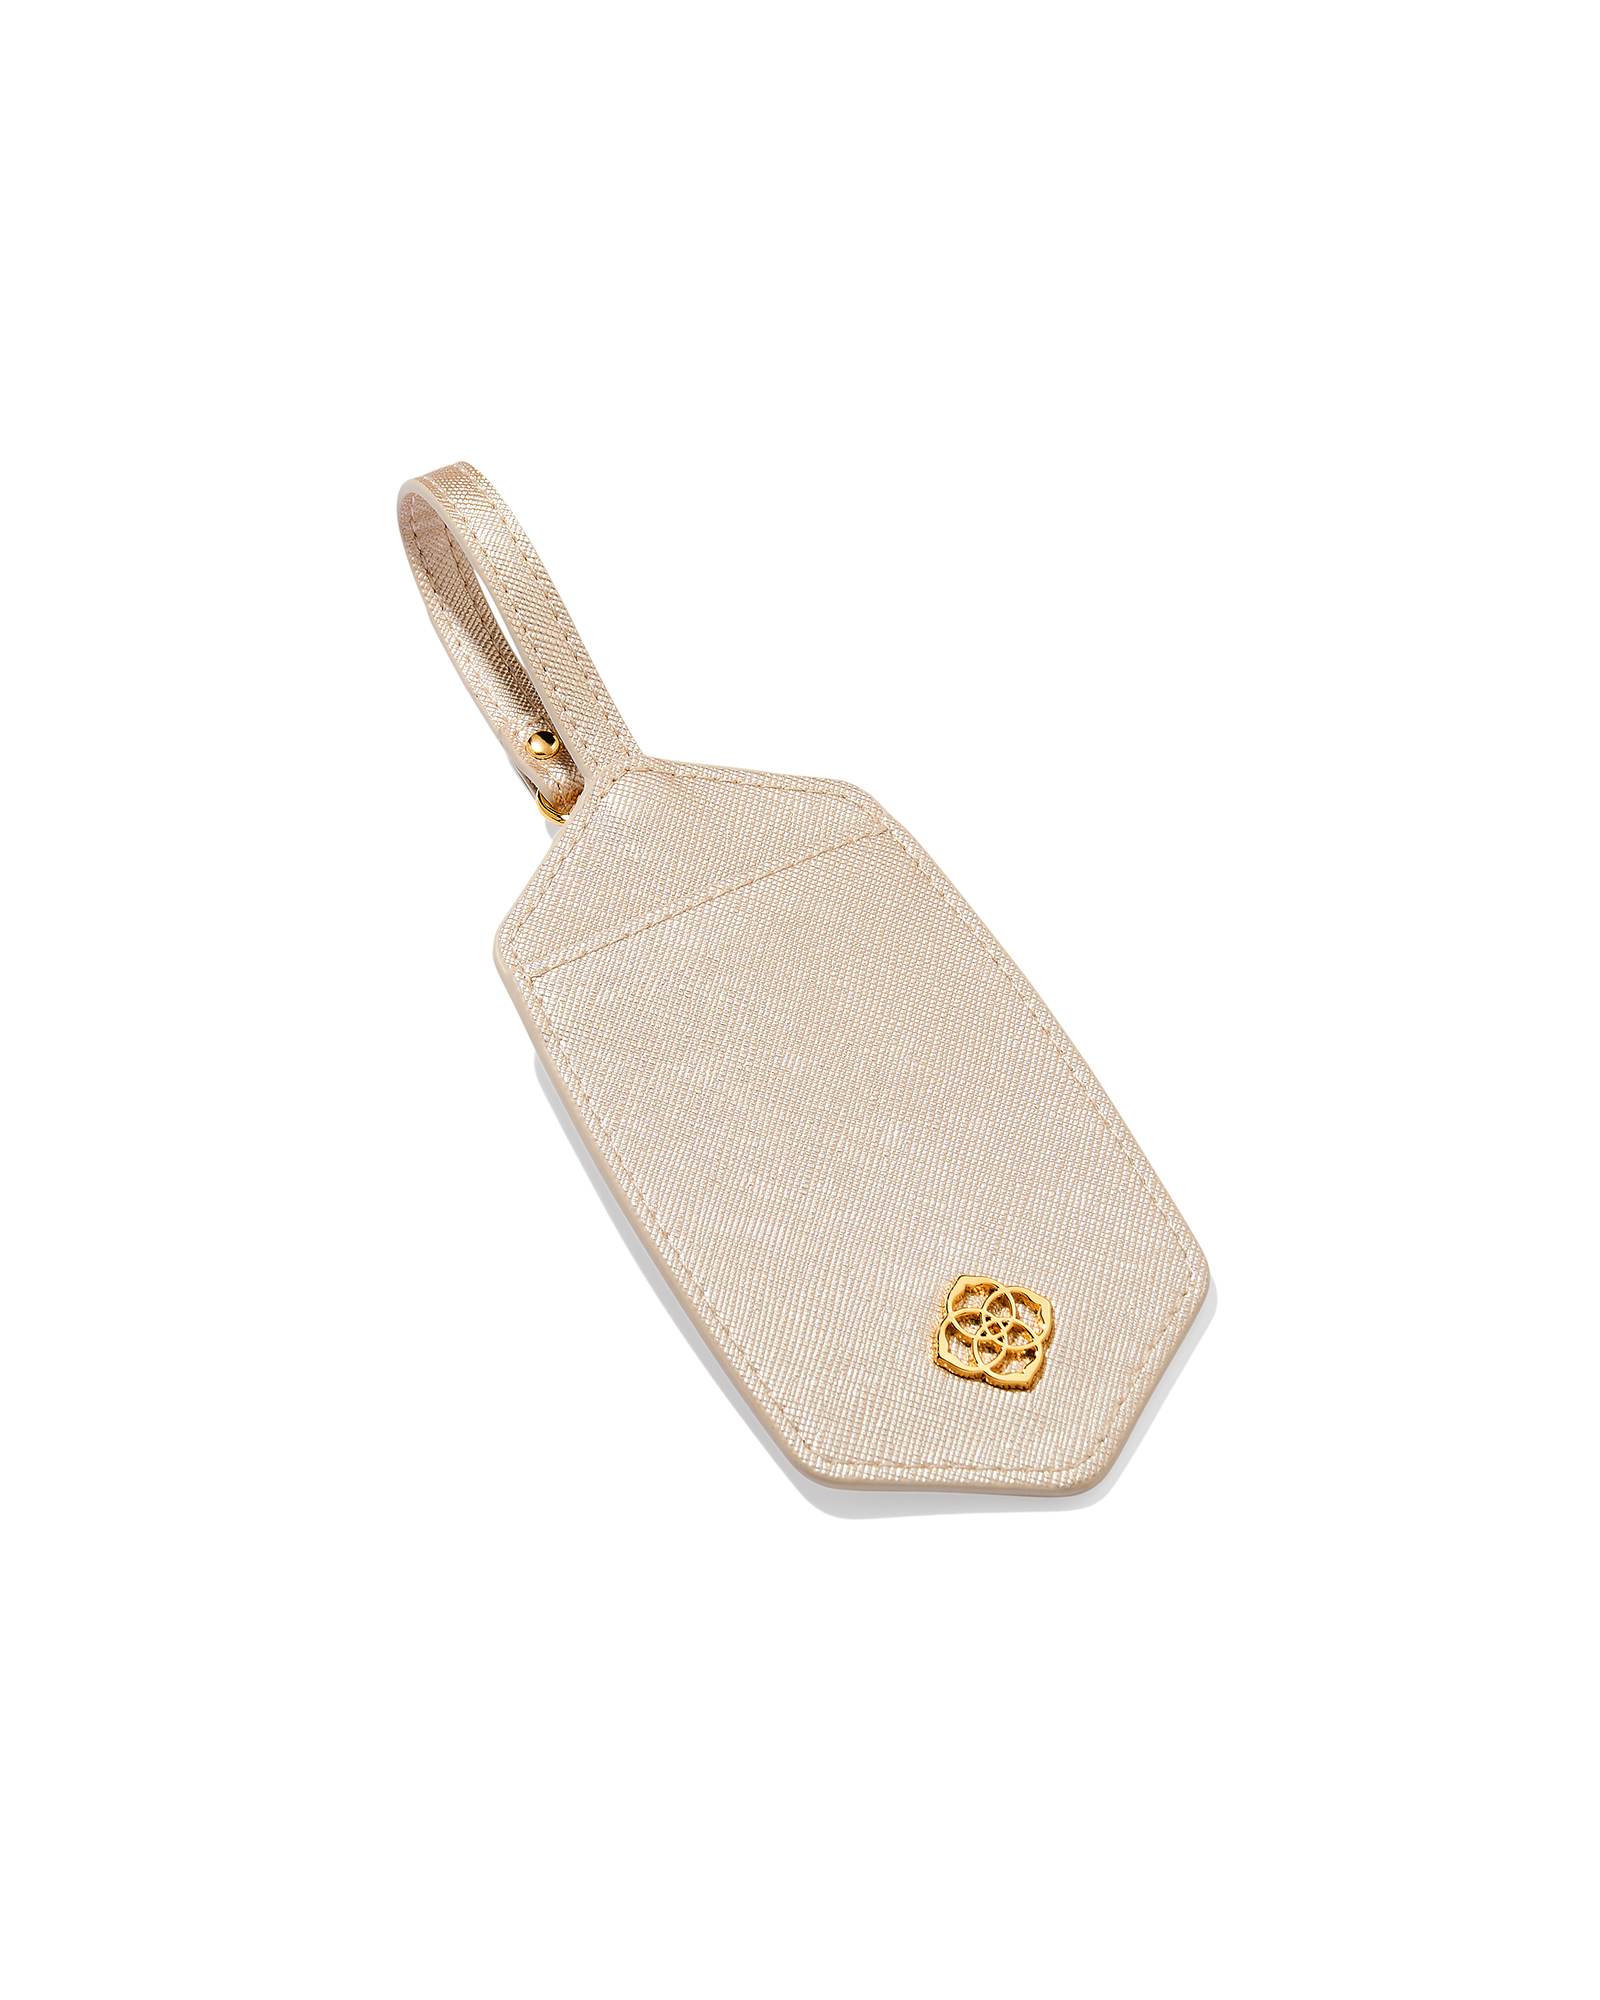 Luggage Tag in Champagne